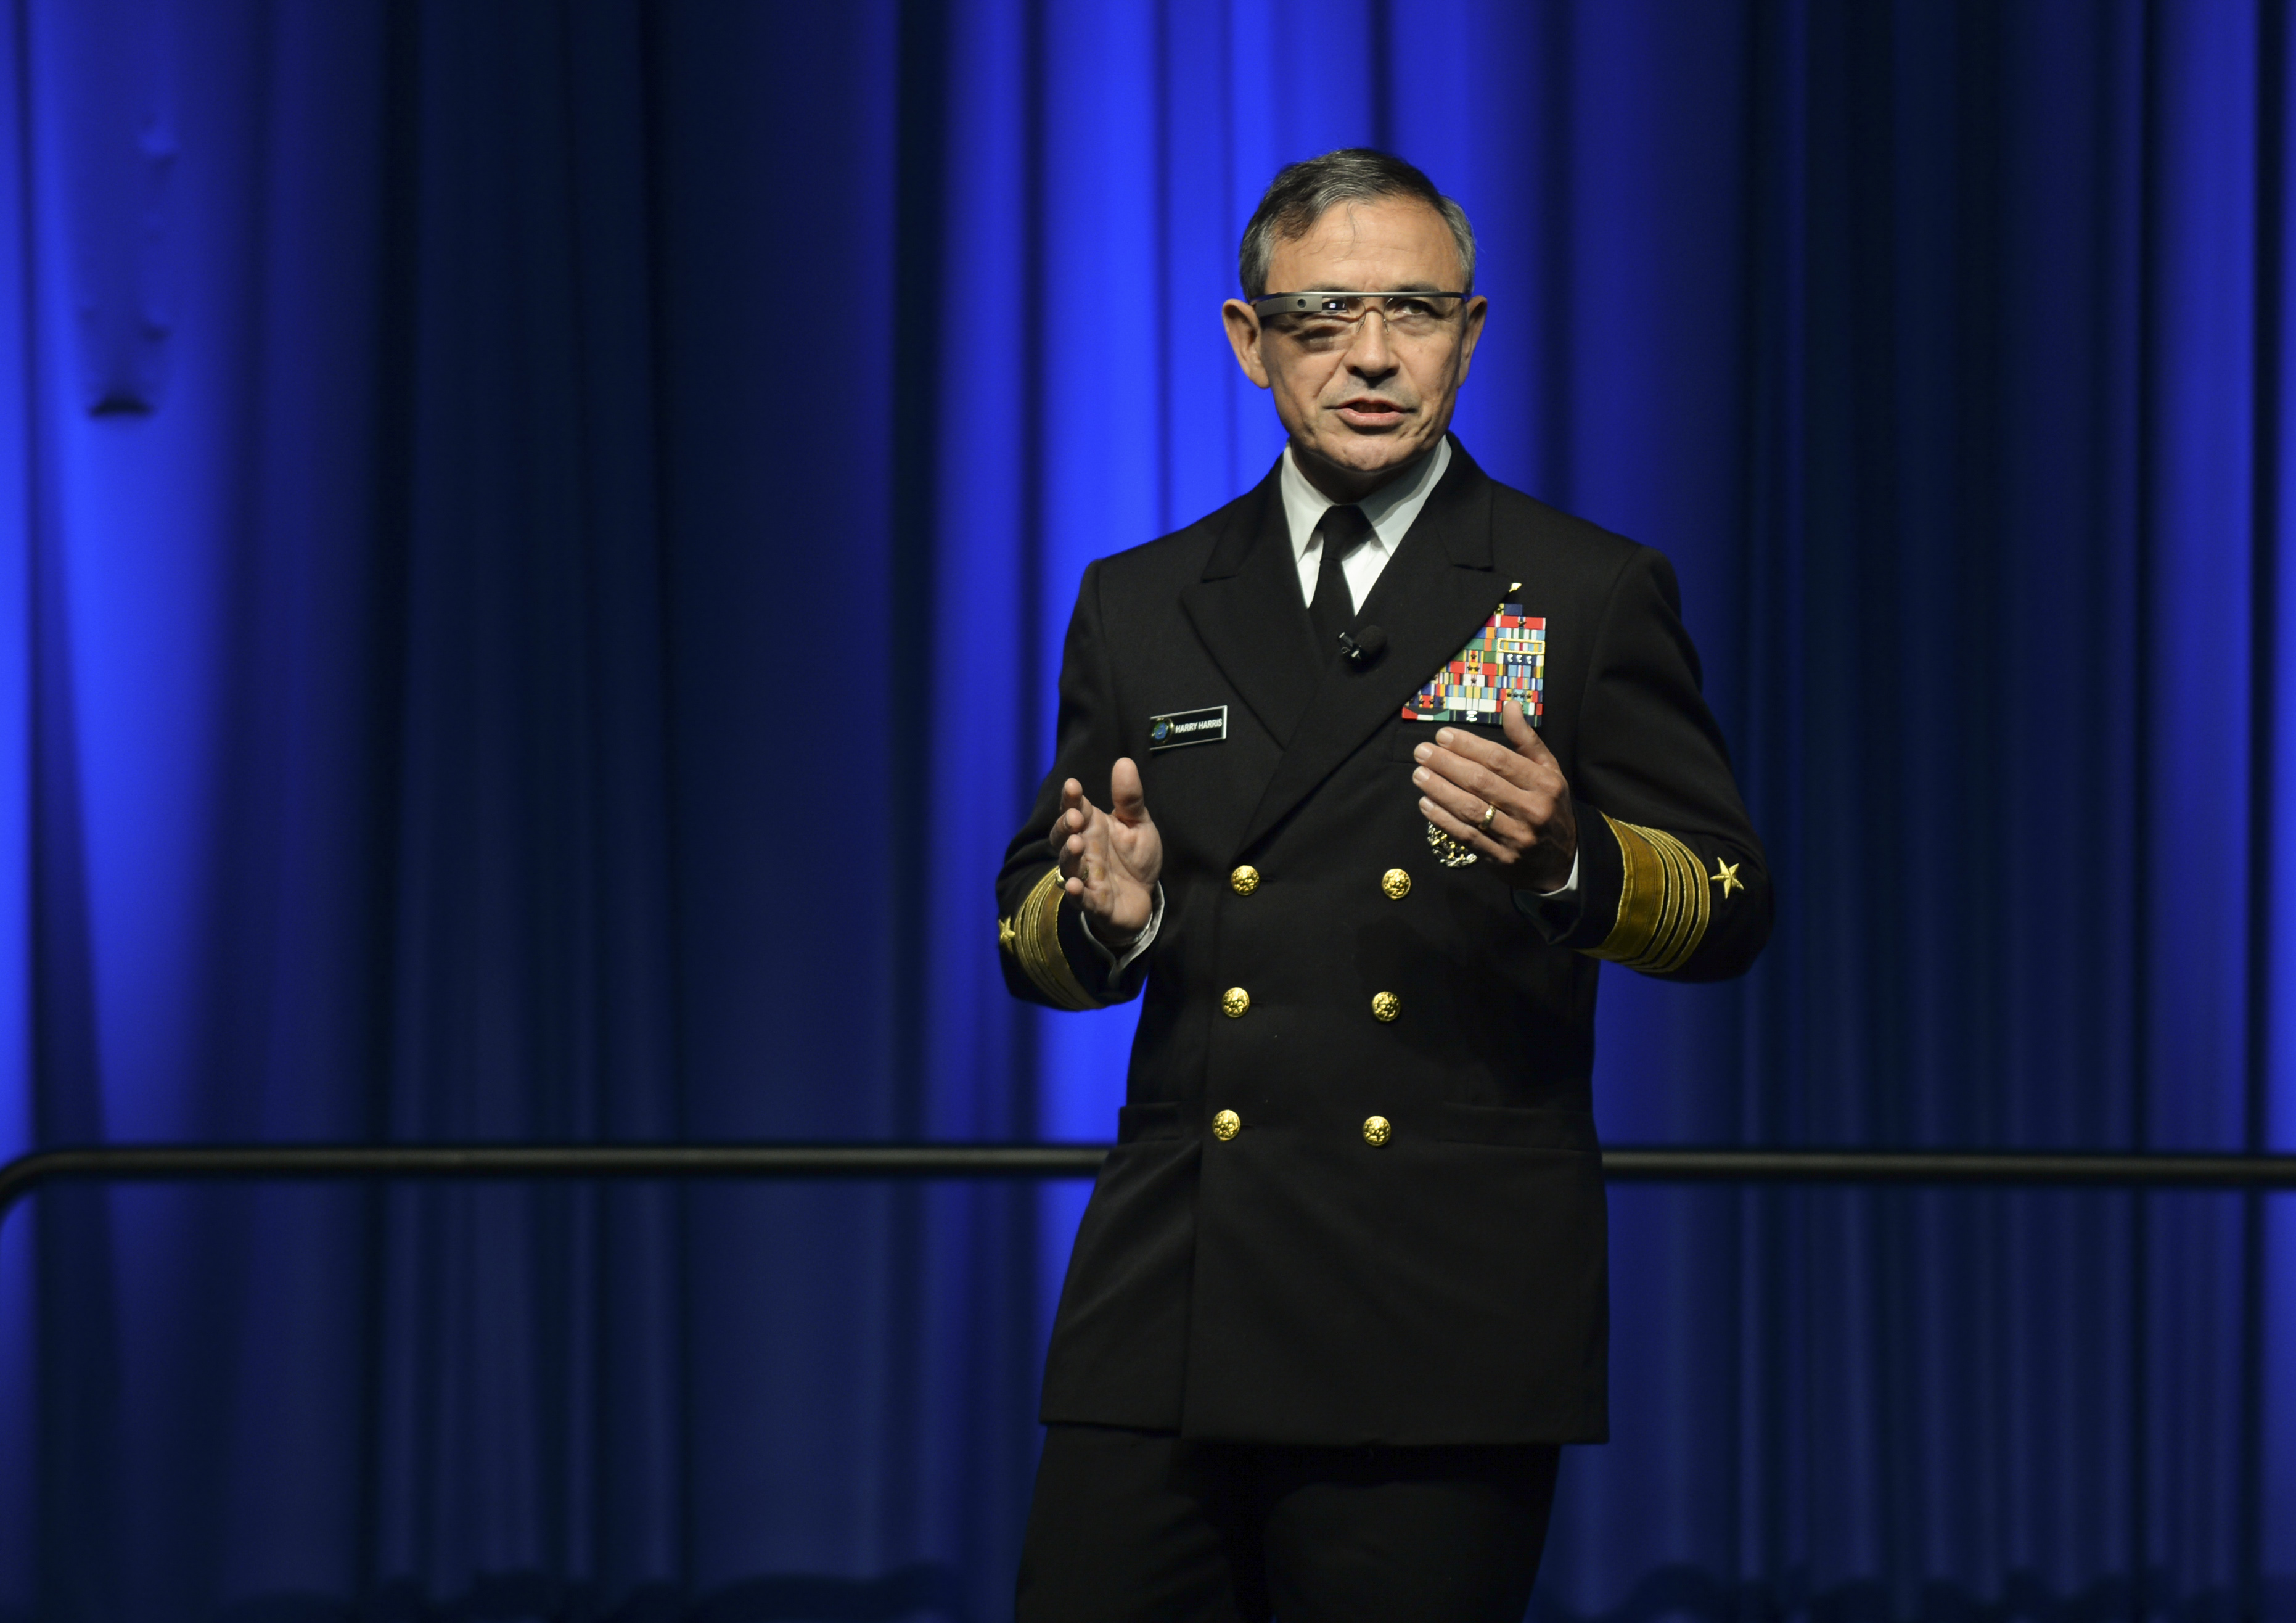 Adm. Harry B. Harris, commander of U.S. Pacific Fleet at the 2014 WEST conference in San Diego, Calif. on Feb. 11, 2014. US Navy photo